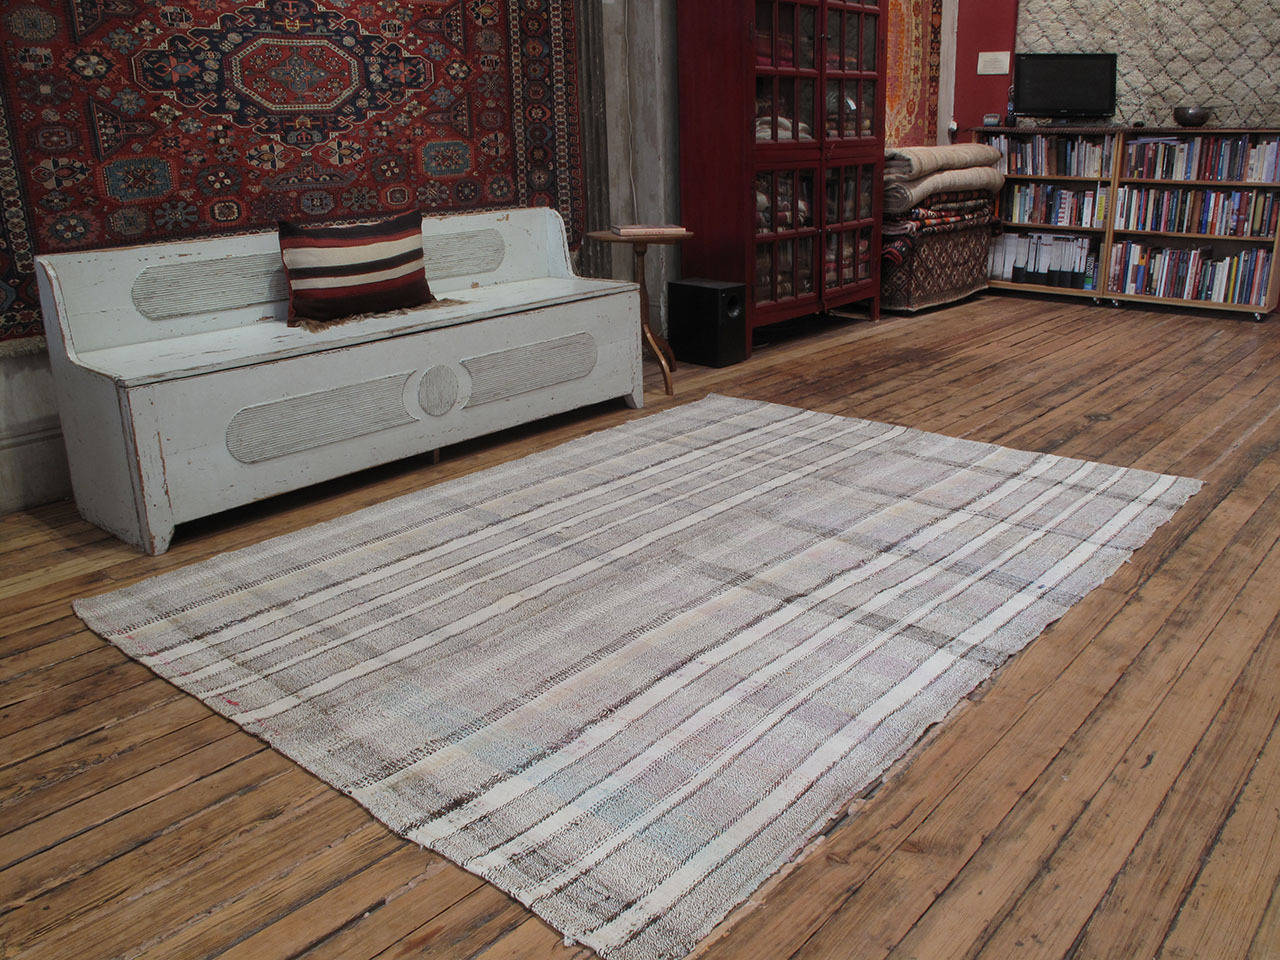 A simple old tribal Kilim from Southeastern Turkey, woven in two panels, using a mixture of goat hair and cotton. Unadorned flat-weaves like this would have been used as everyday floor covers in the weaver's household.